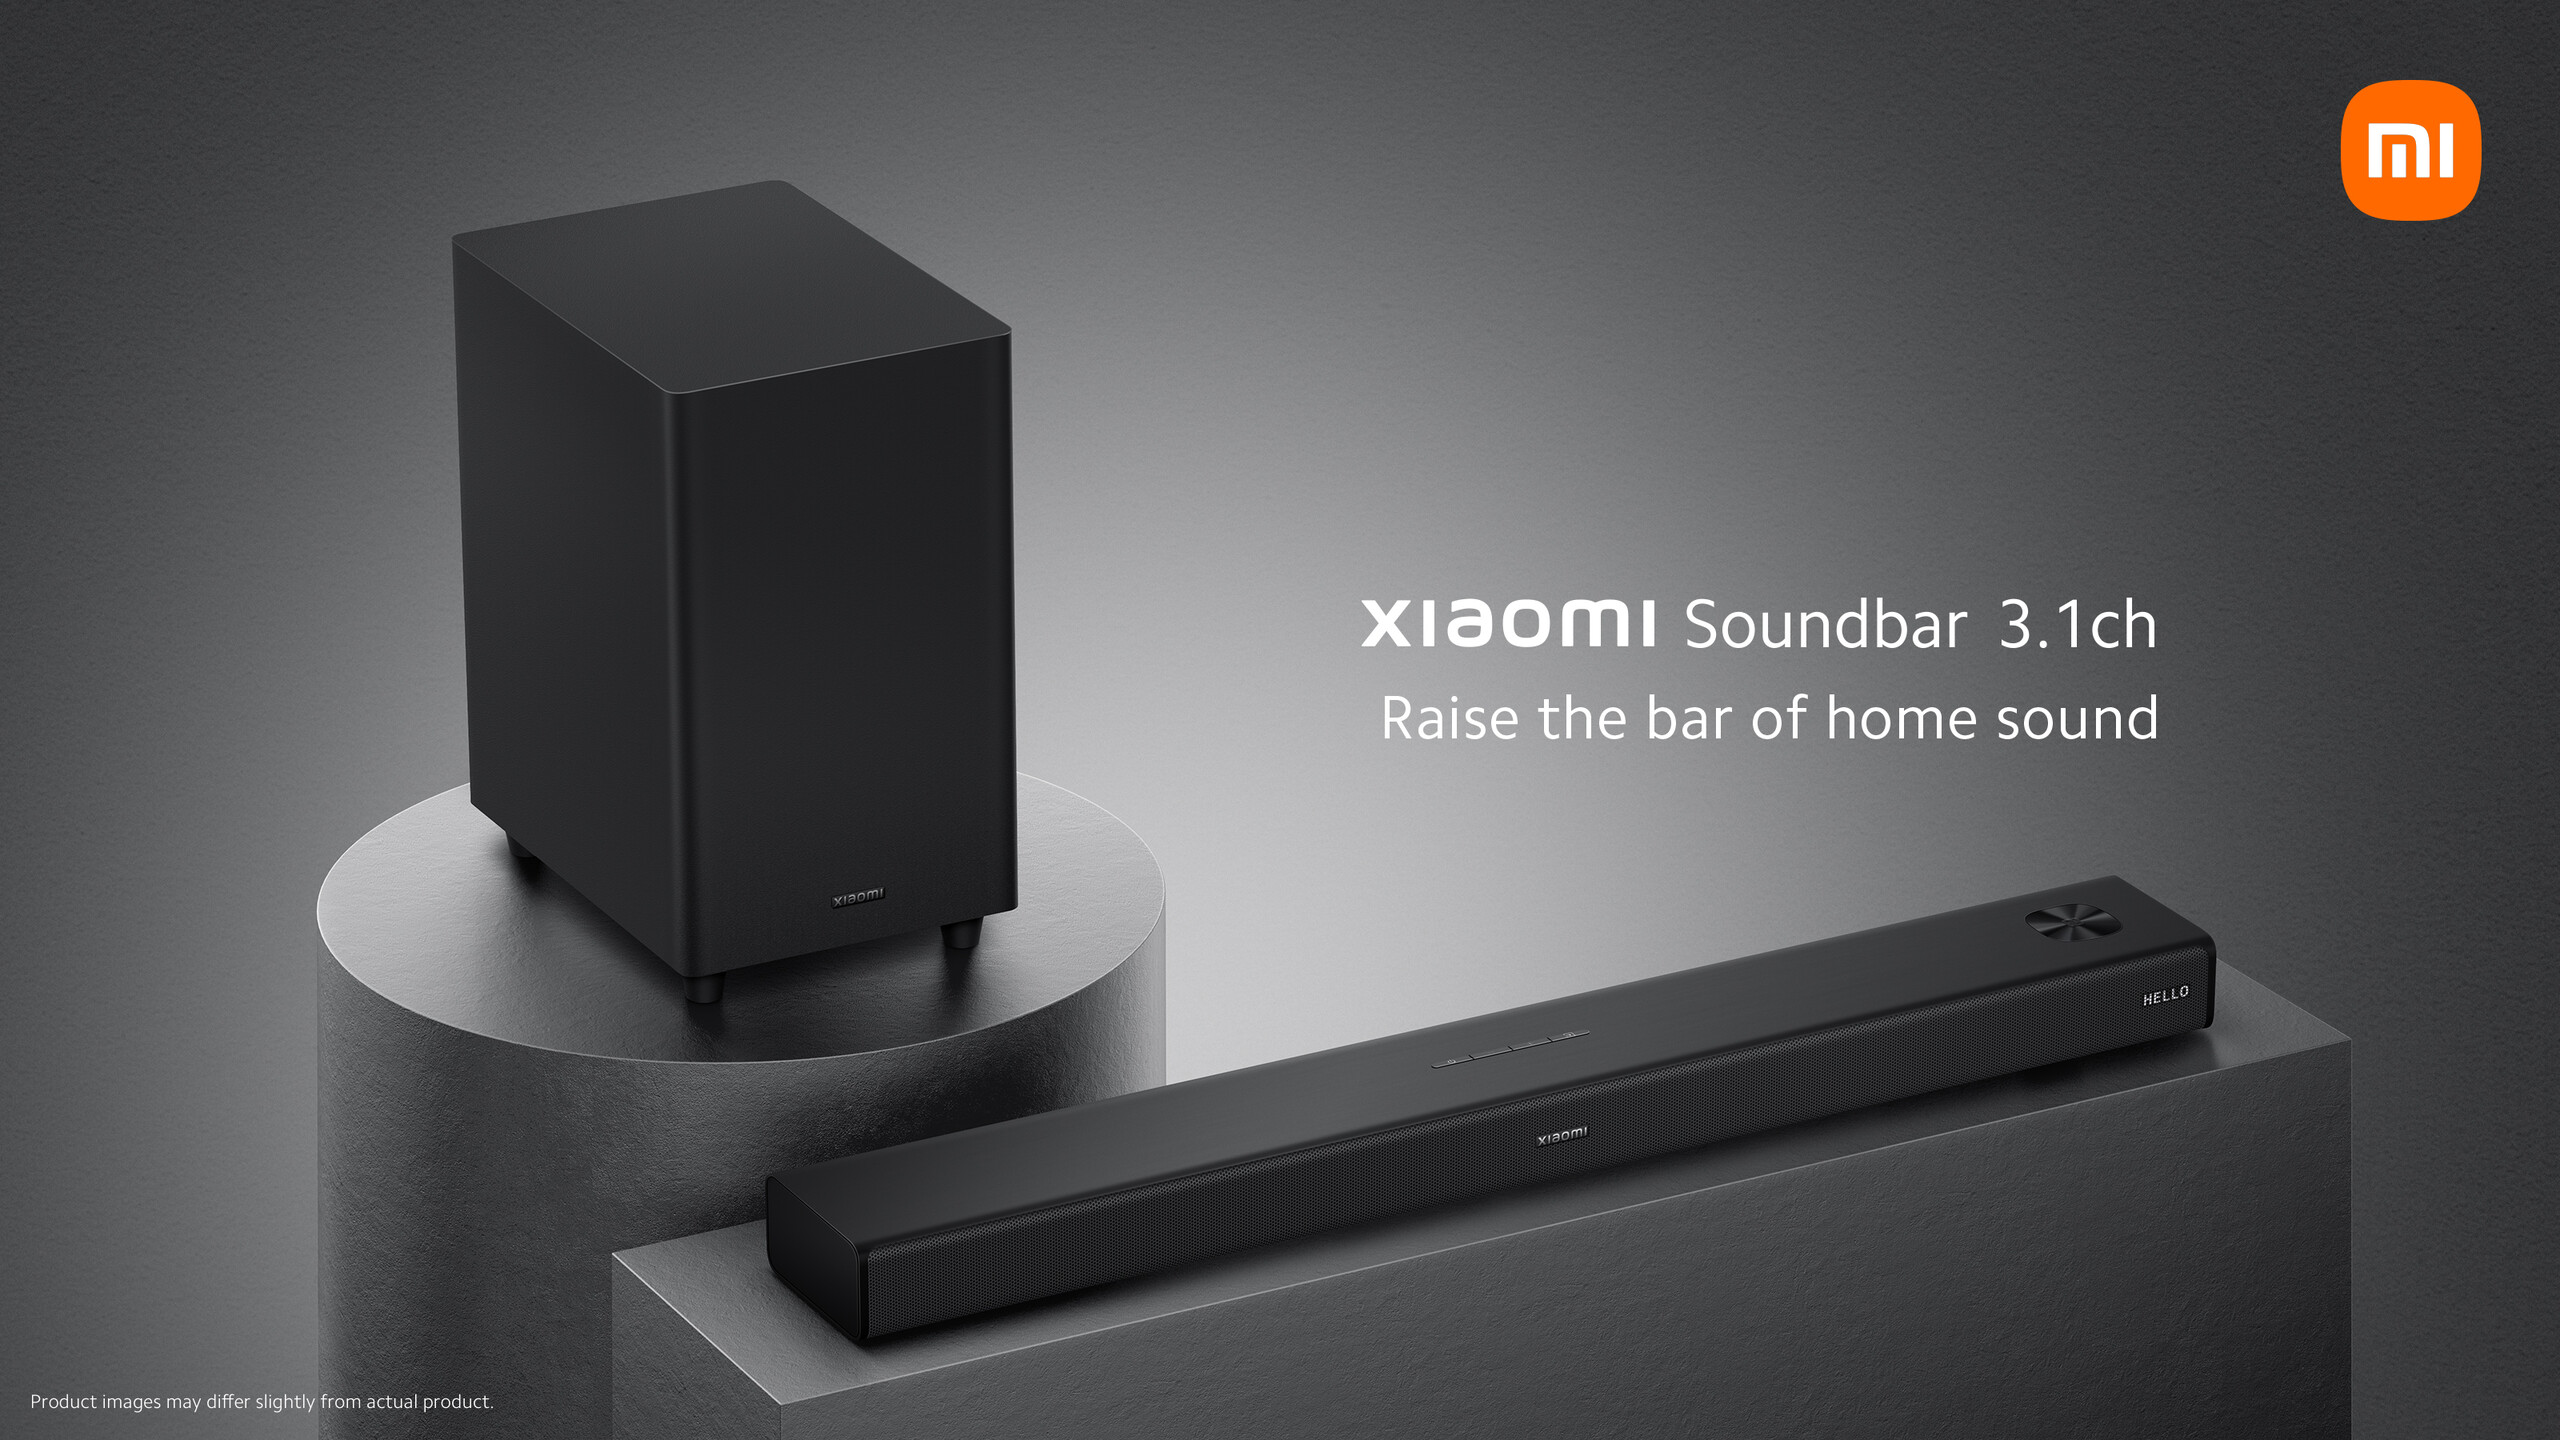 Xiaomi Soundbar W soundbar announced with a wireless subwoofer, NFC, Dolby Audio and DTS Virtual:X support - NotebookCheck.net News